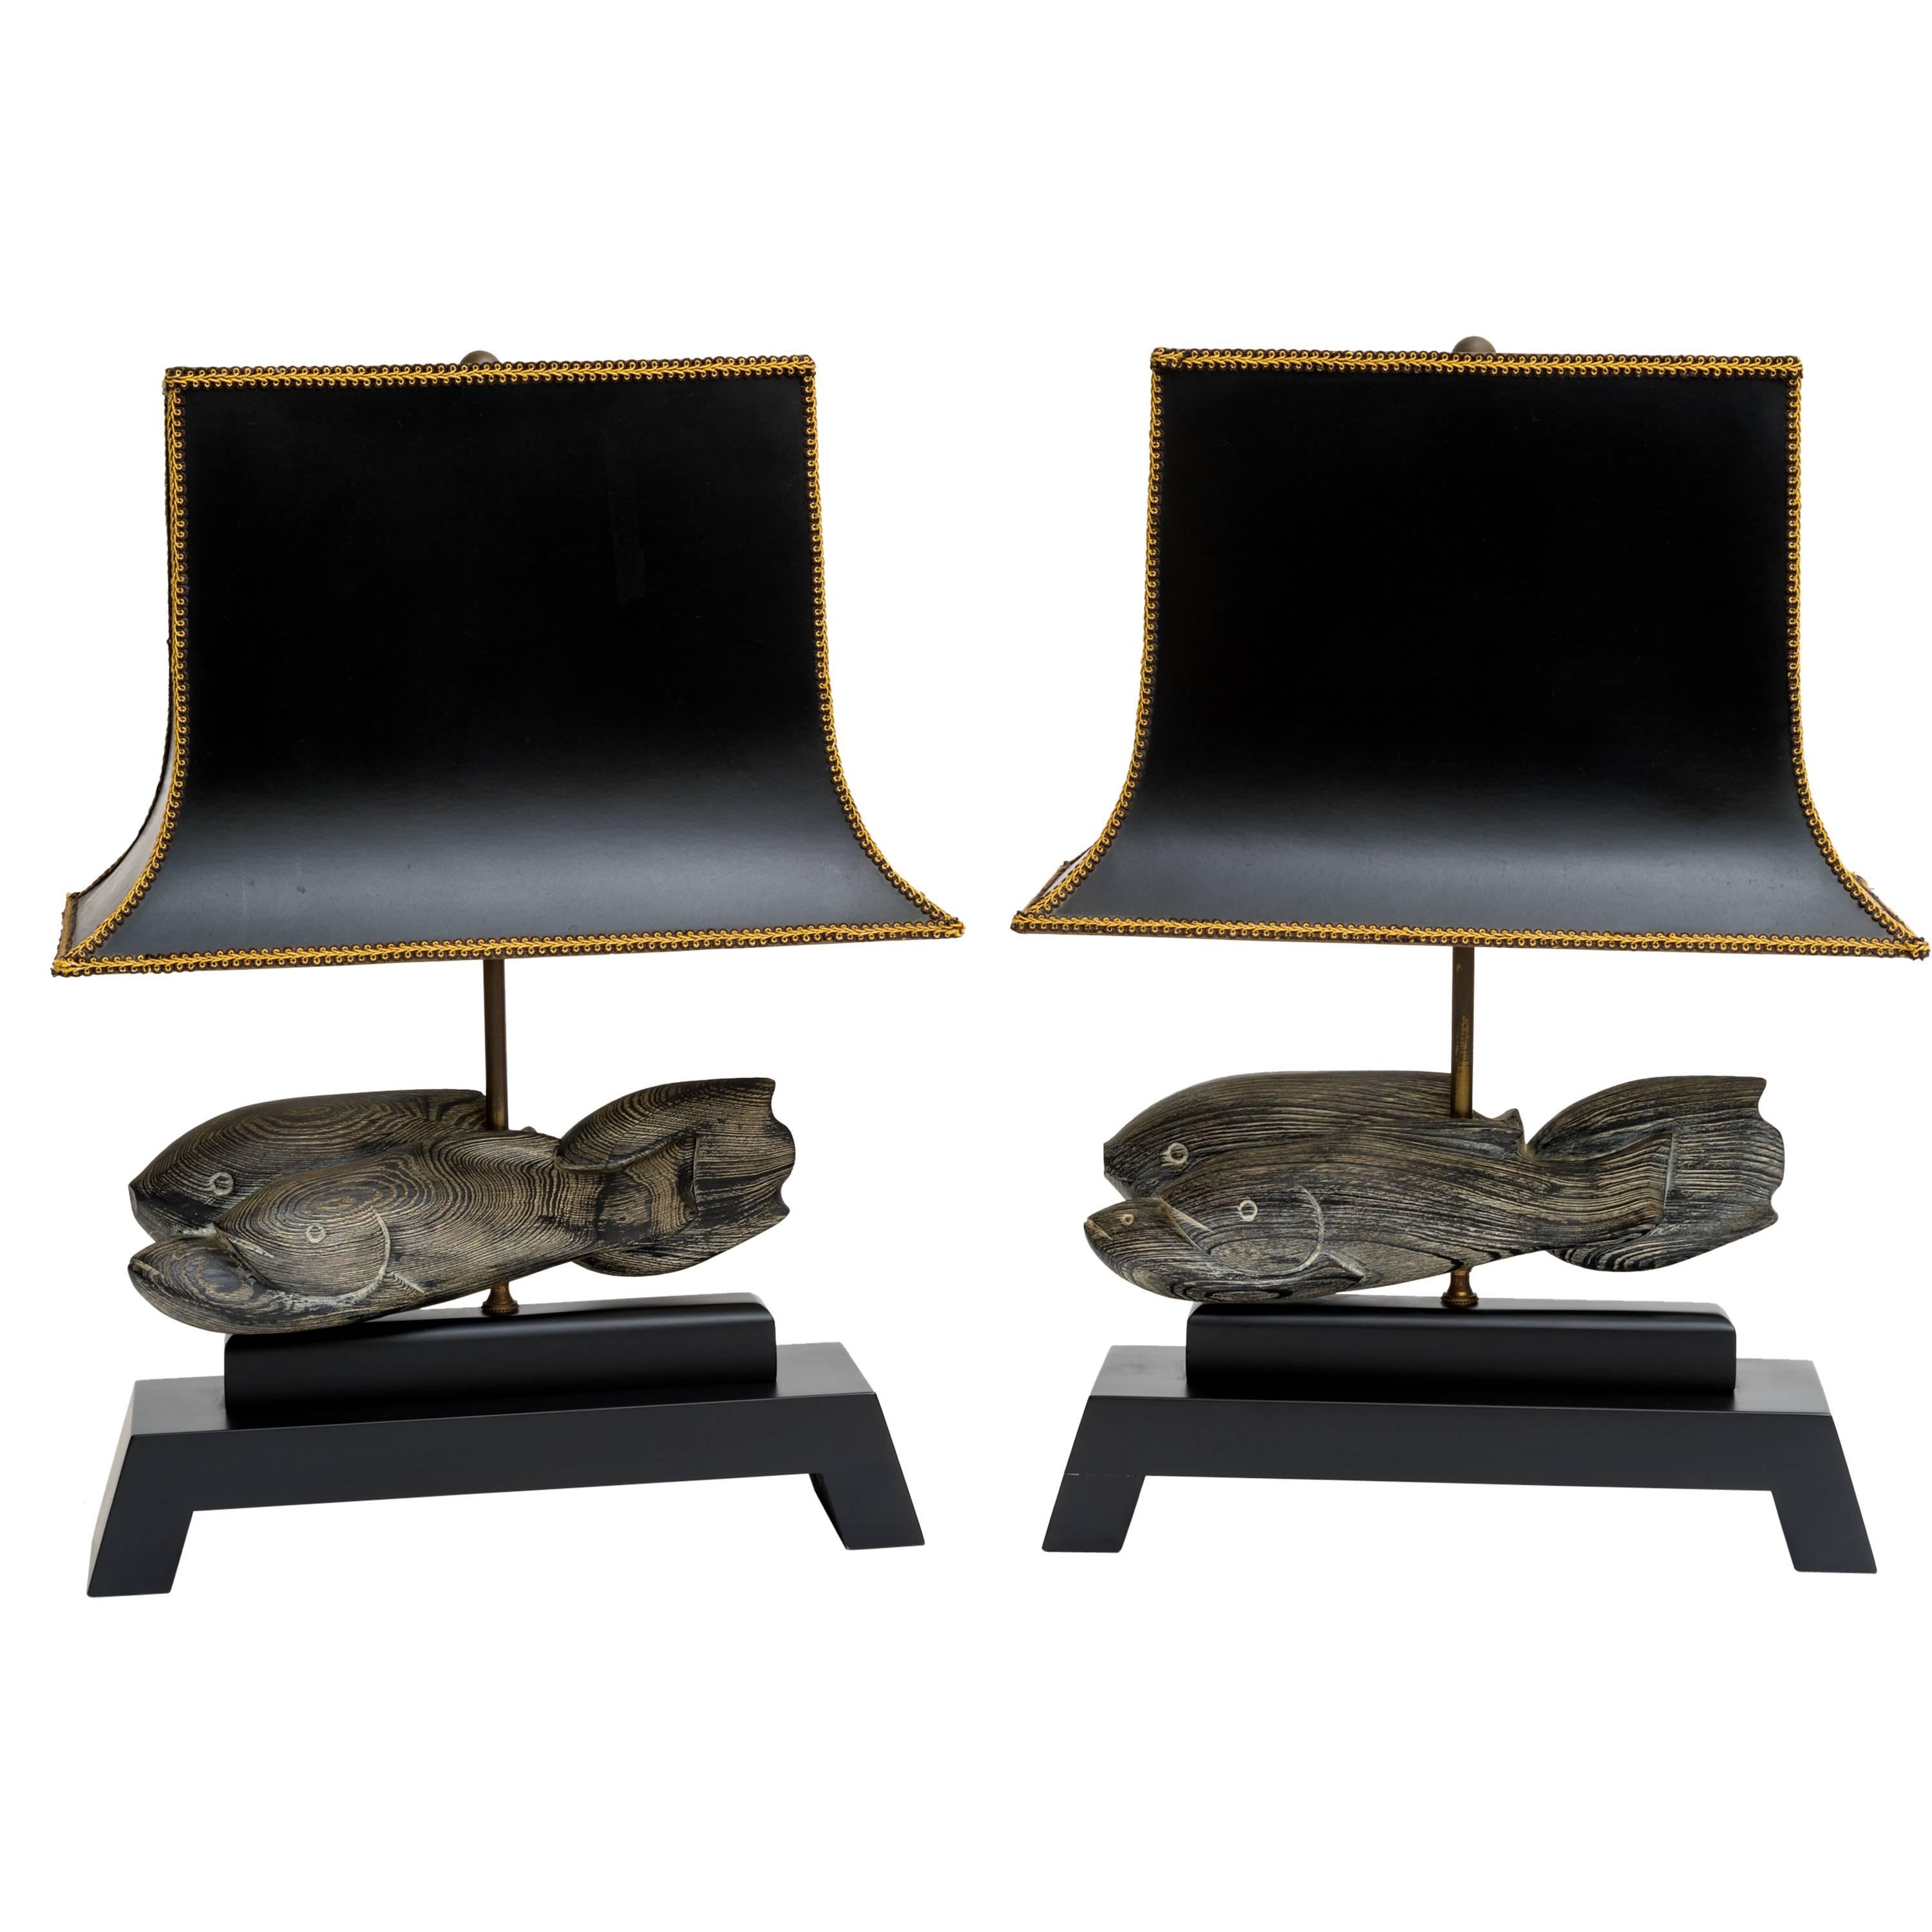 Cerused Fish Sculpture Lamps with Platform Bases For Sale